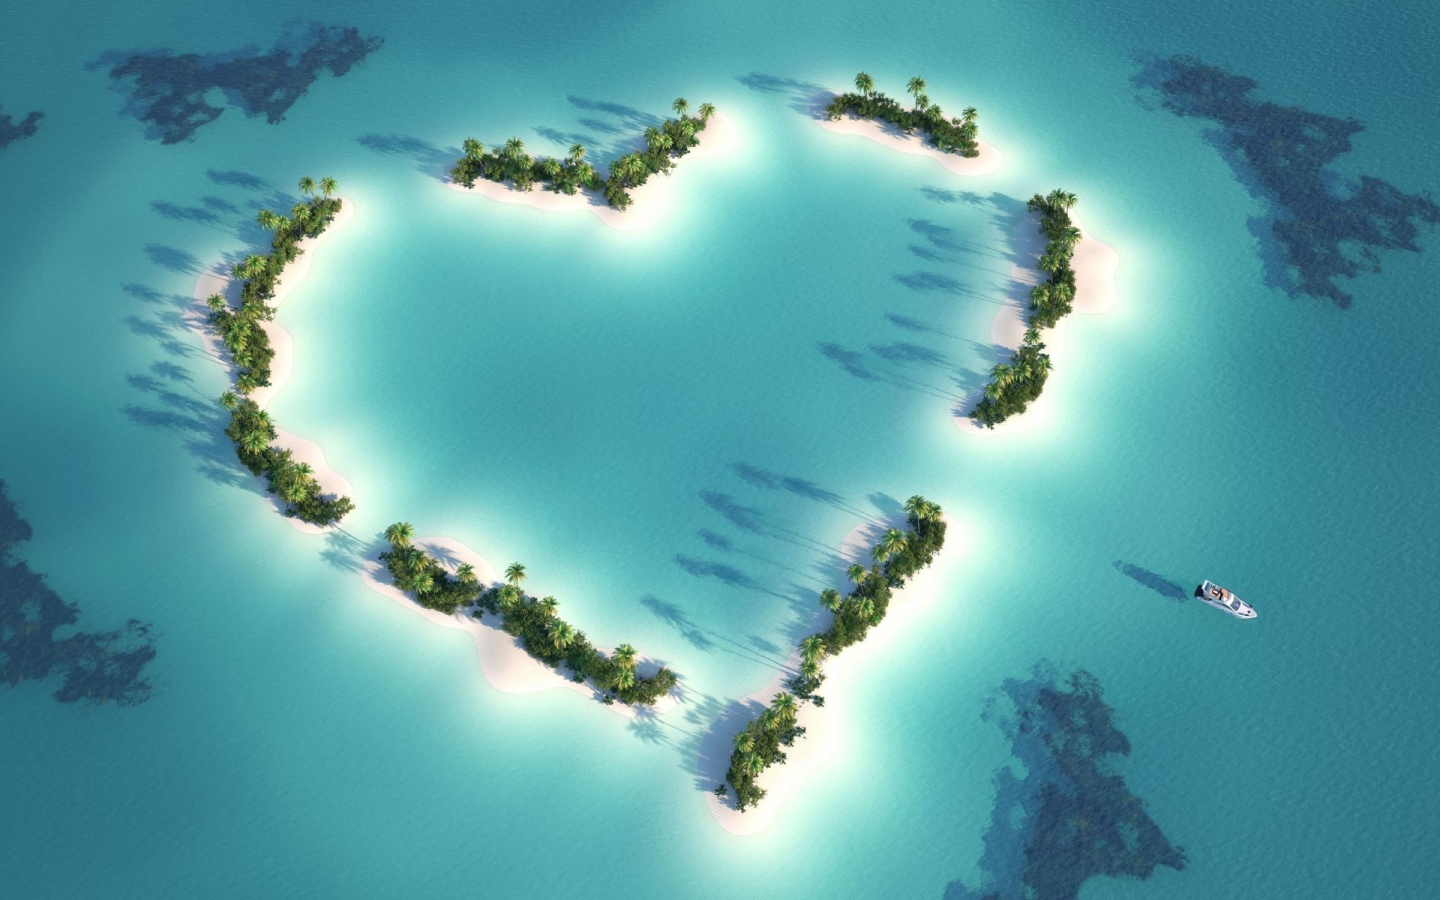 The Love Island for 1440 x 900 widescreen resolution